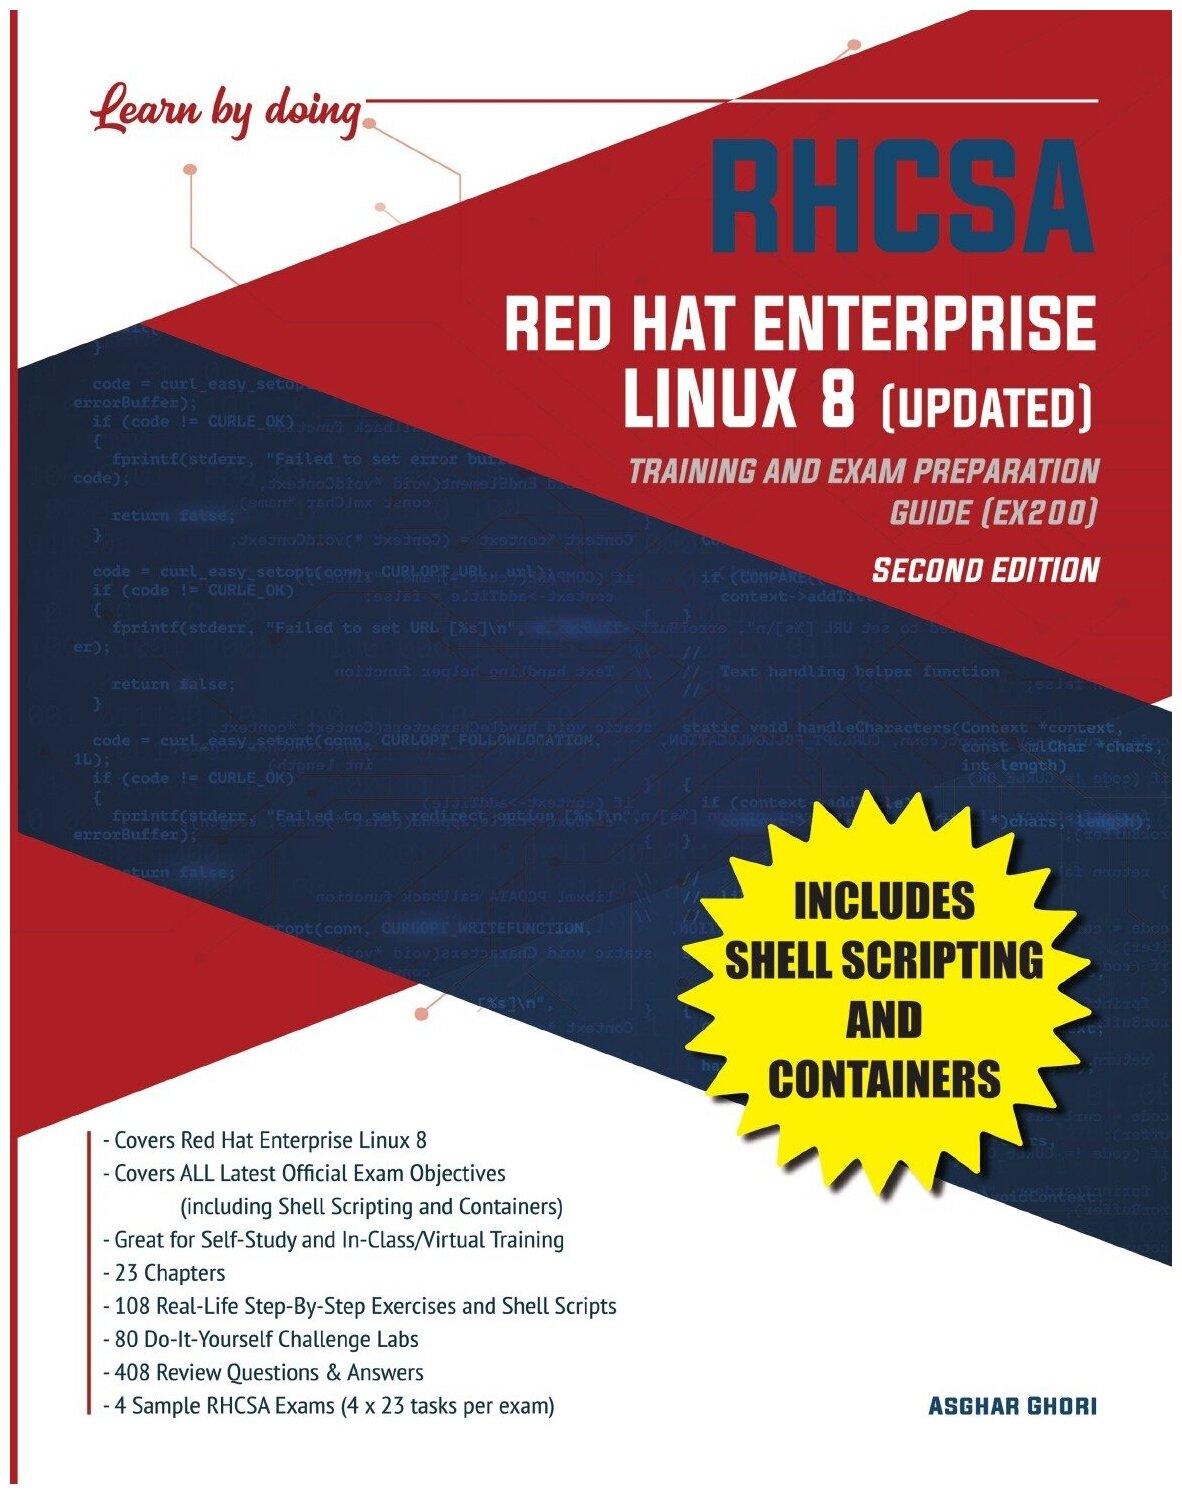 RHCSA Red Hat Enterprise Linux 8 (UPDATED). Training and Exam Preparation Guide (EX200), Second Edition